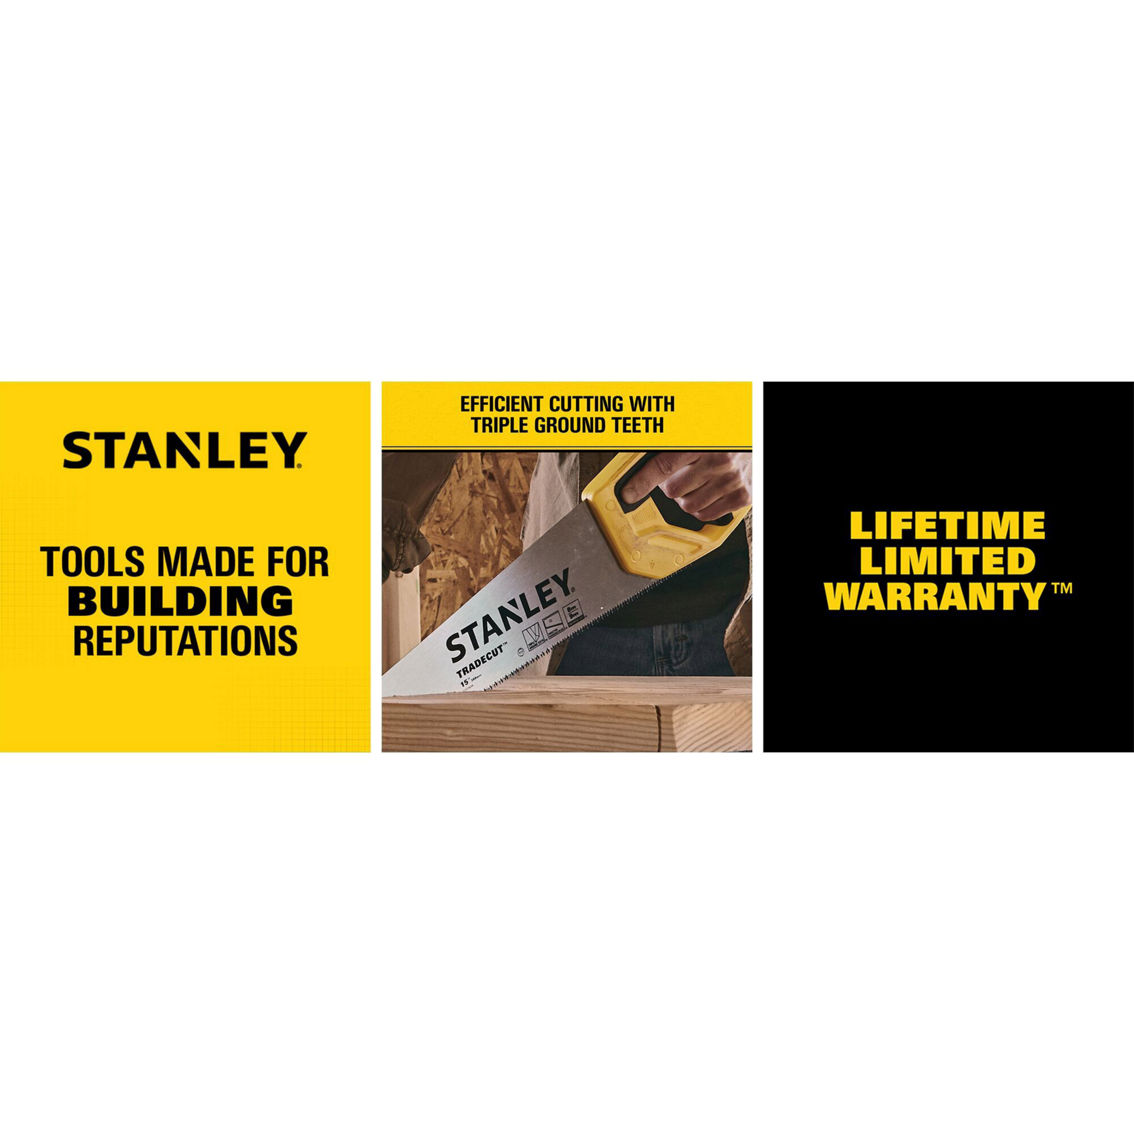 Stanley 15 in. TRADECUT Panel Saw - Image 4 of 4